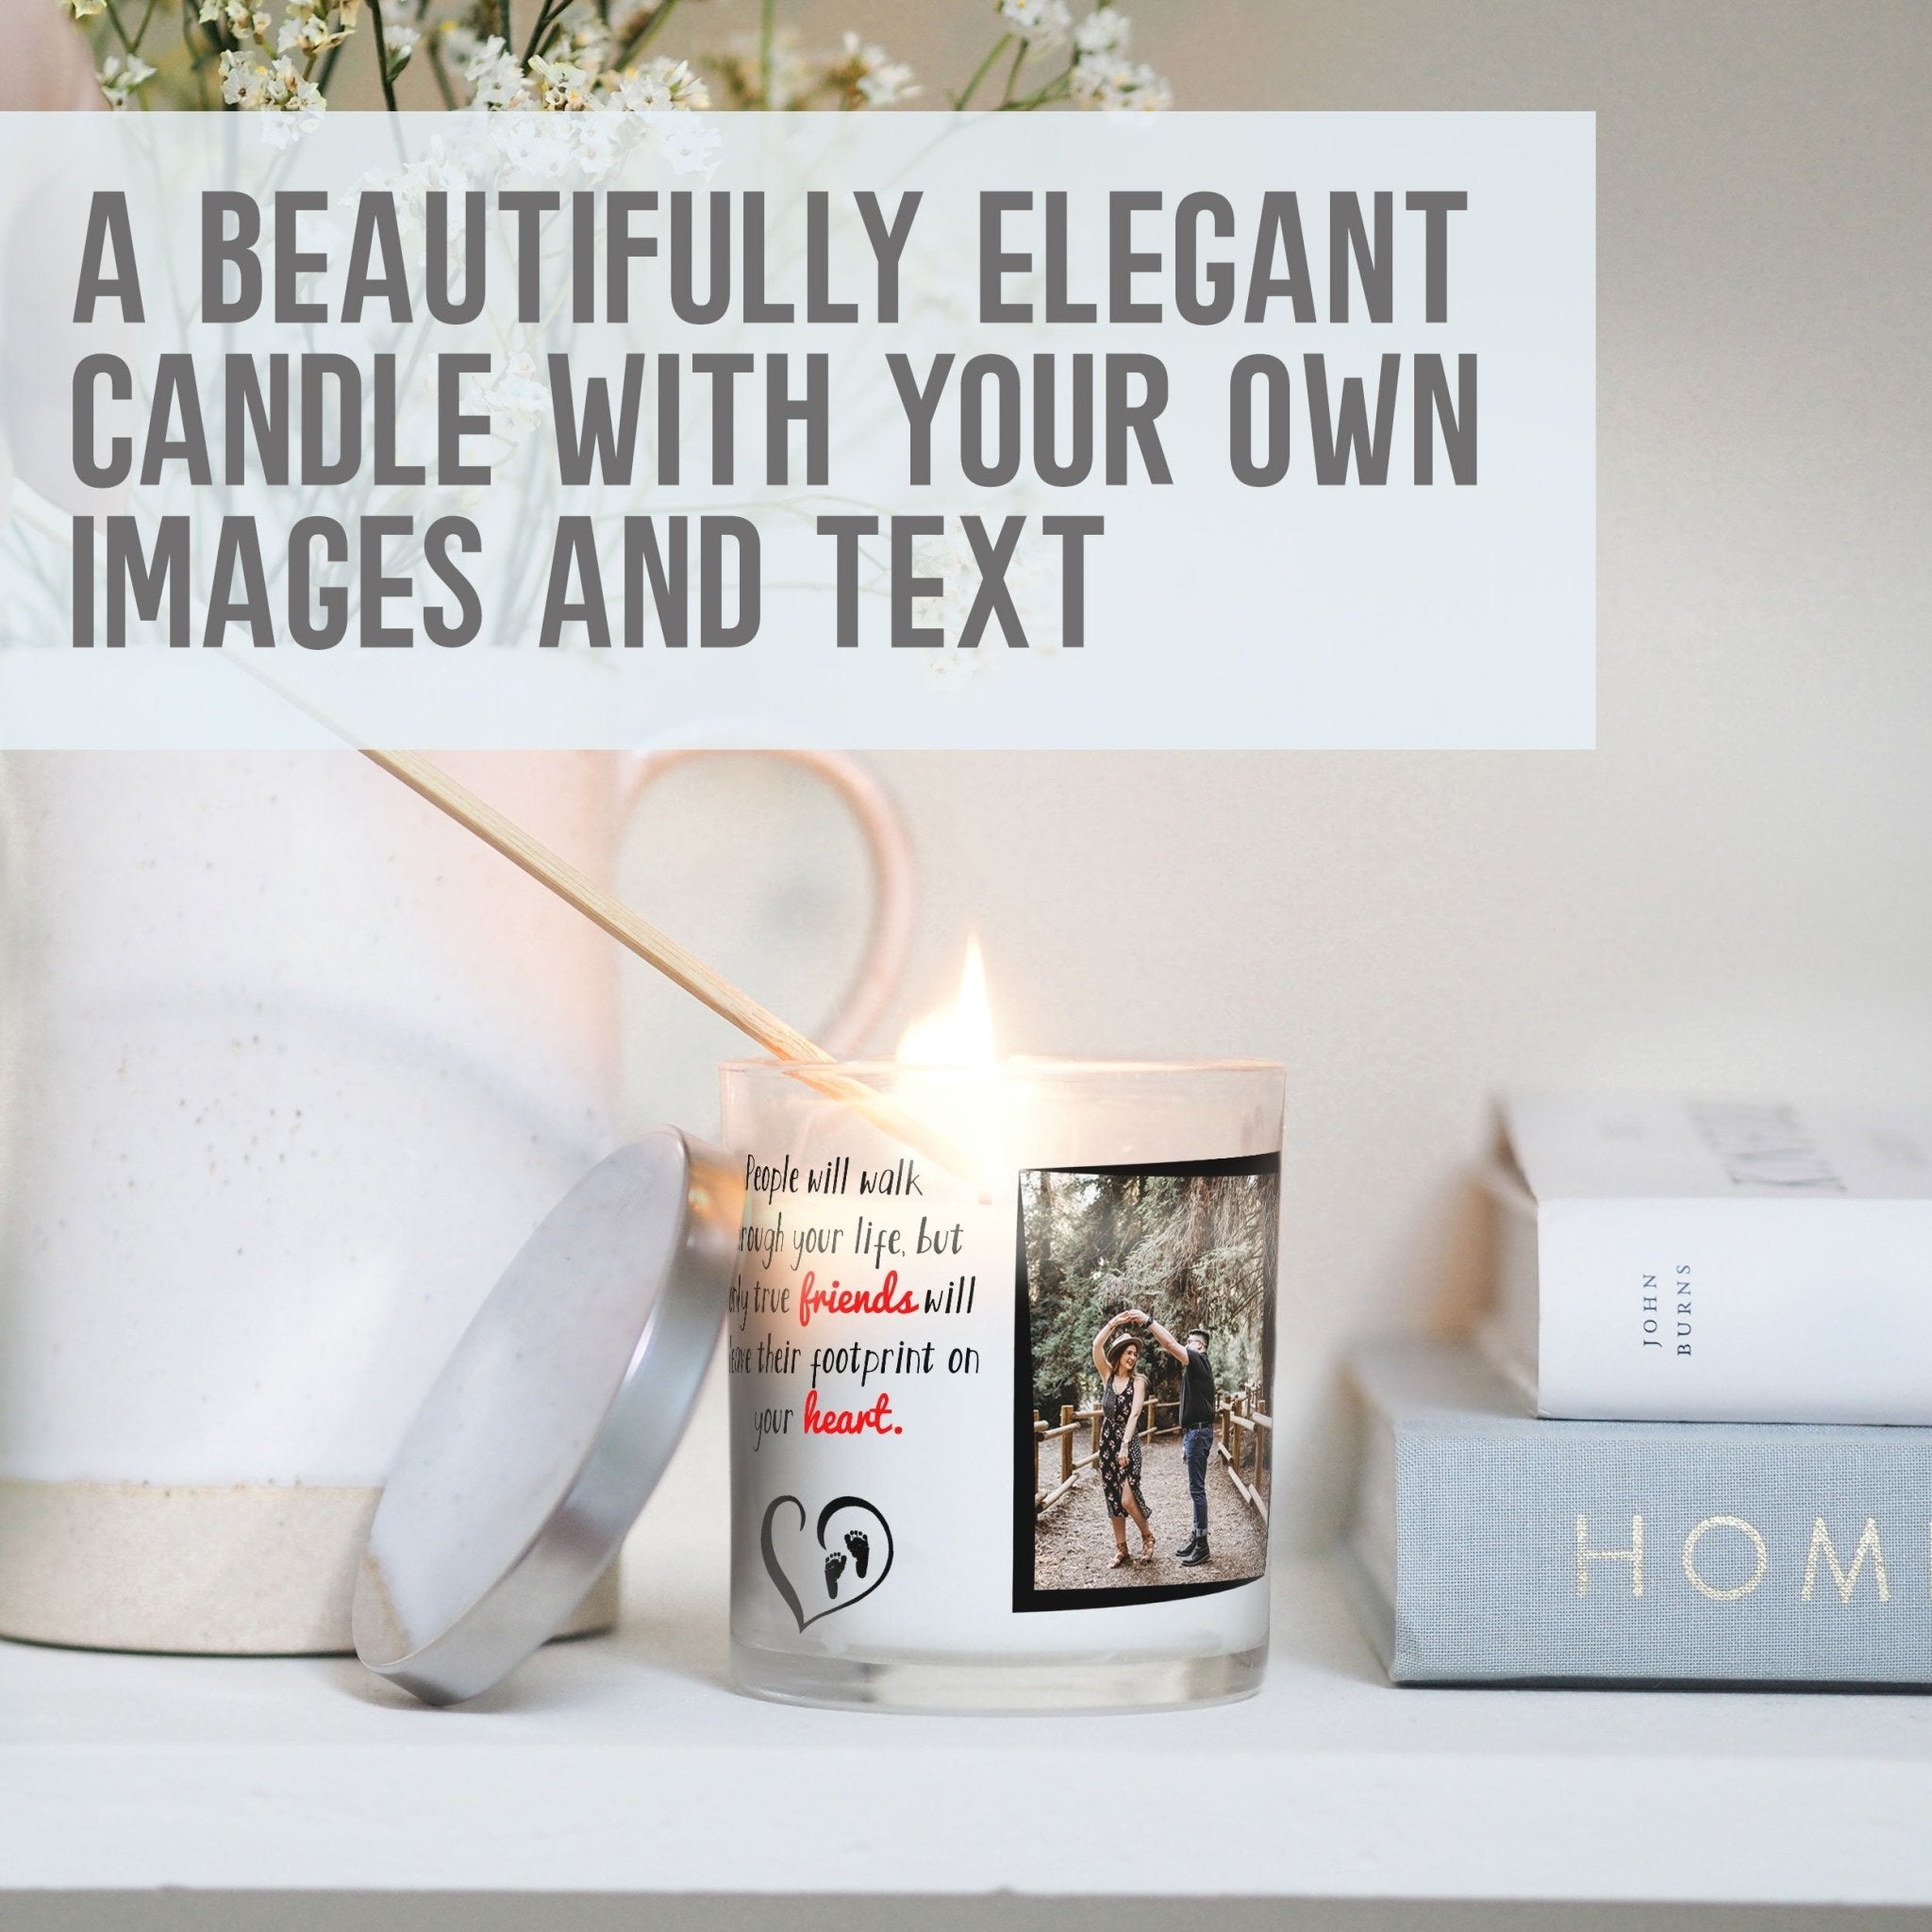 Best Friend Customized Photo Candle Holder | Pal Quotation Cadre Gift Ideas | Personalized Votive Glass with Picture | Home Decor Present Candleholder - Unique Prints